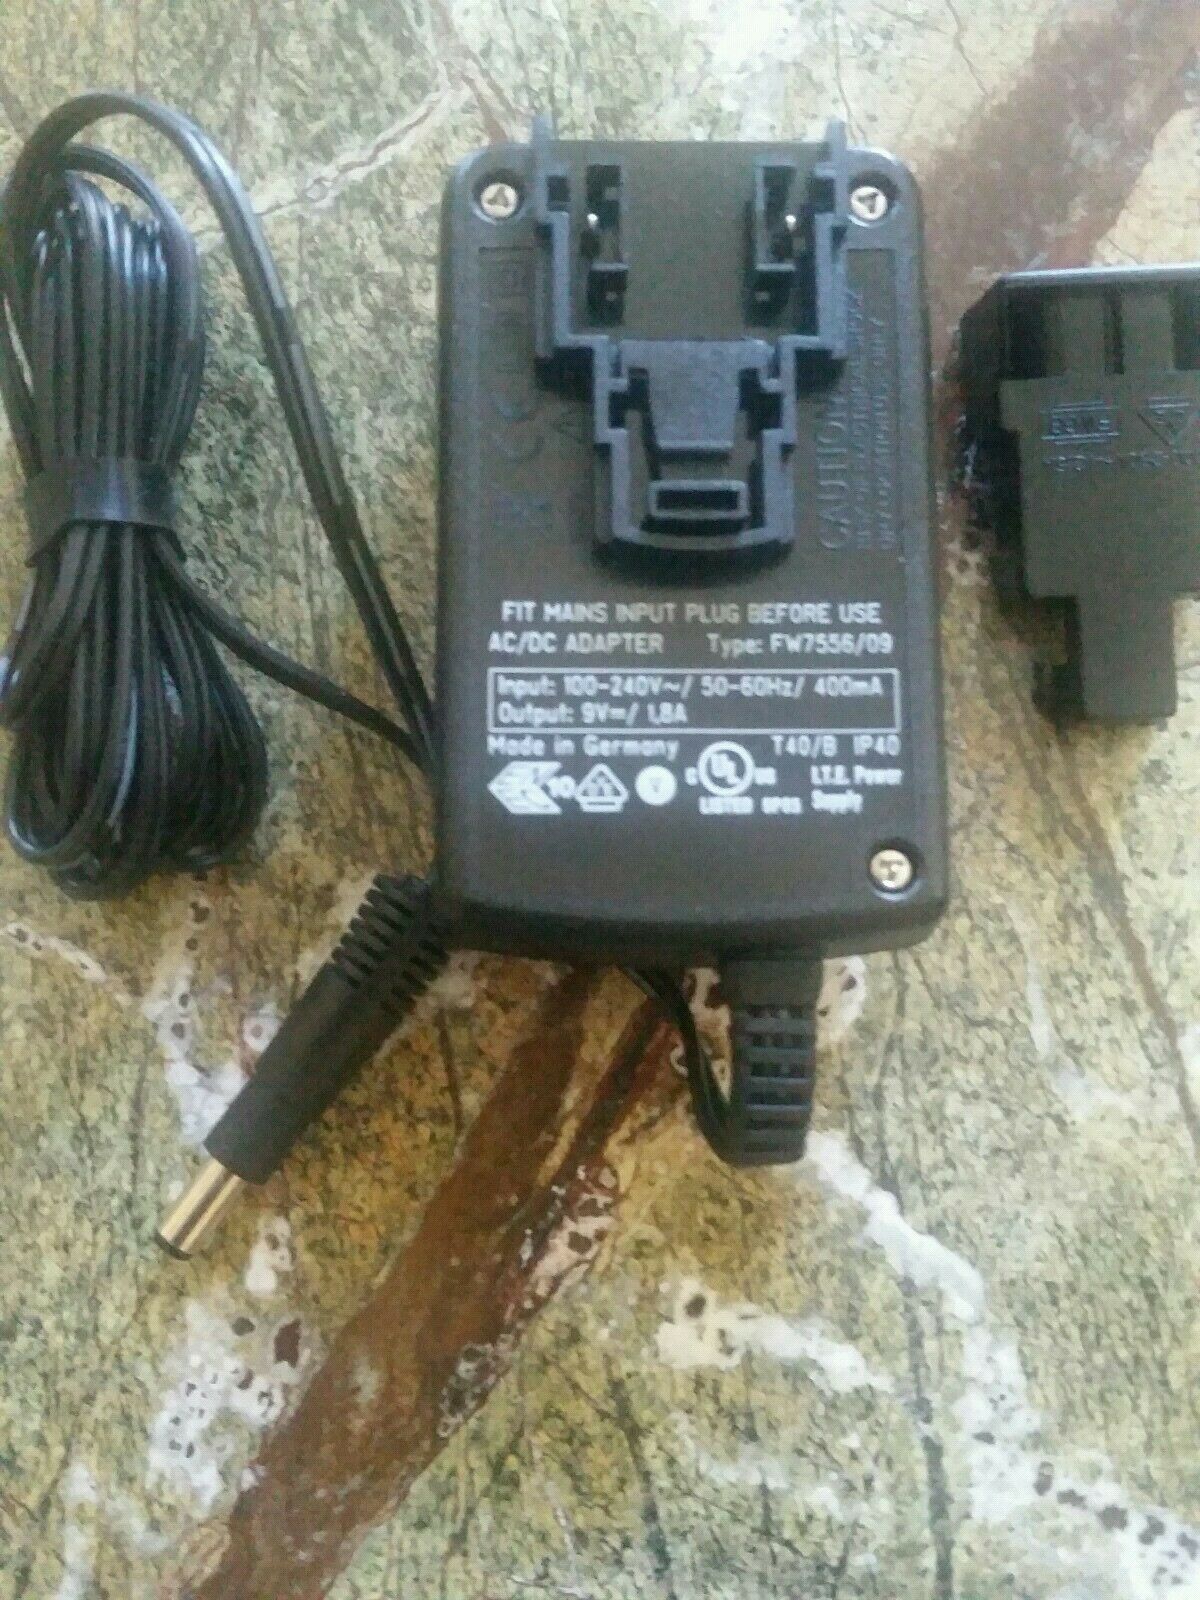 NEW AC DC Adapter FW7556/09 FIT MAINS 9V 1.8A OEM POWER SUPPLY